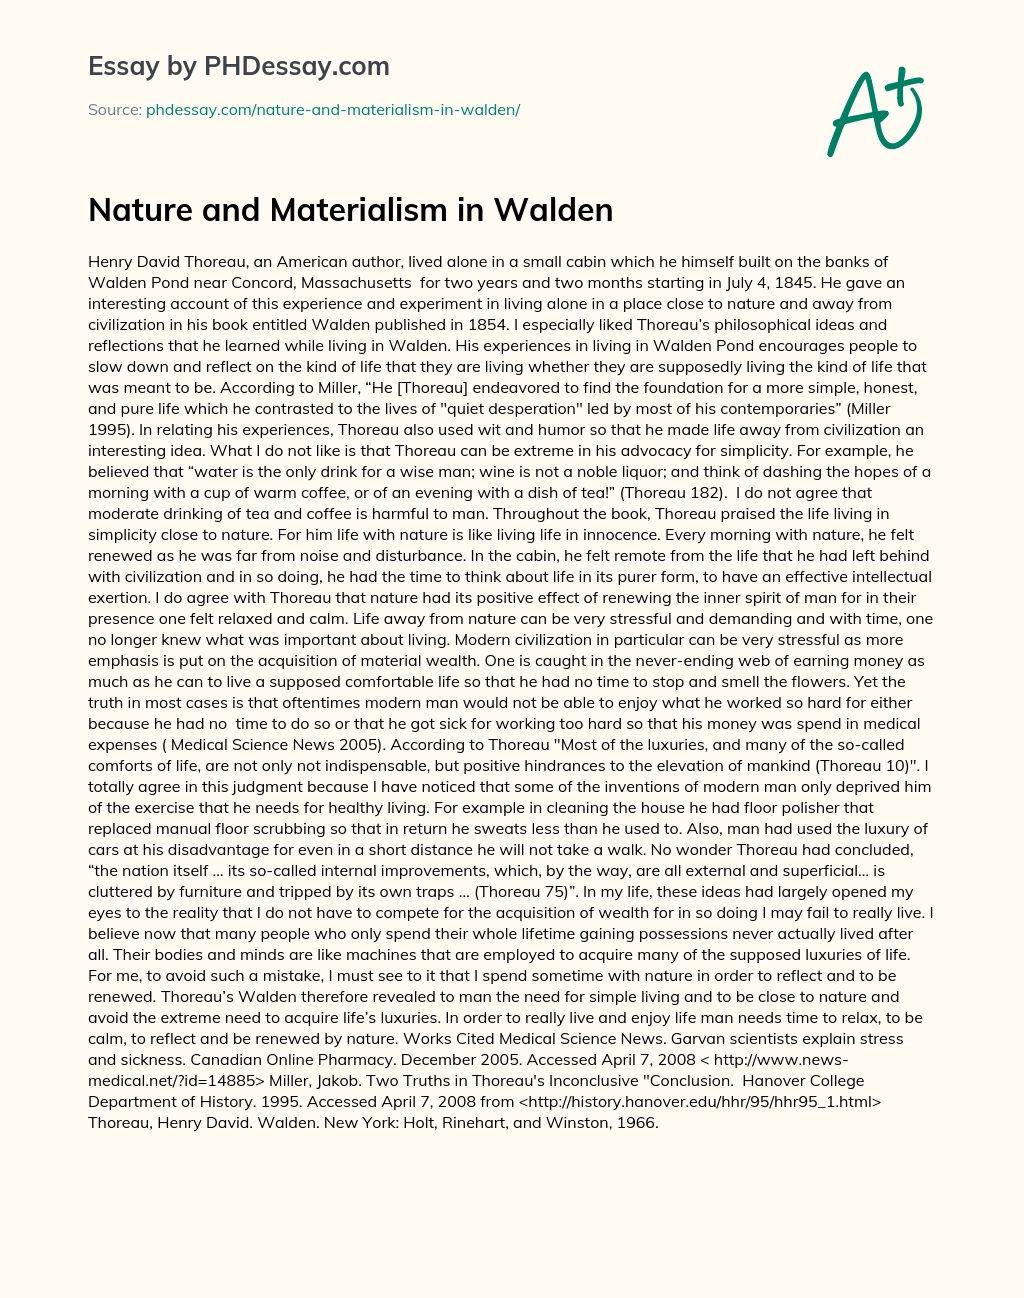 Nature and Materialism in Walden essay